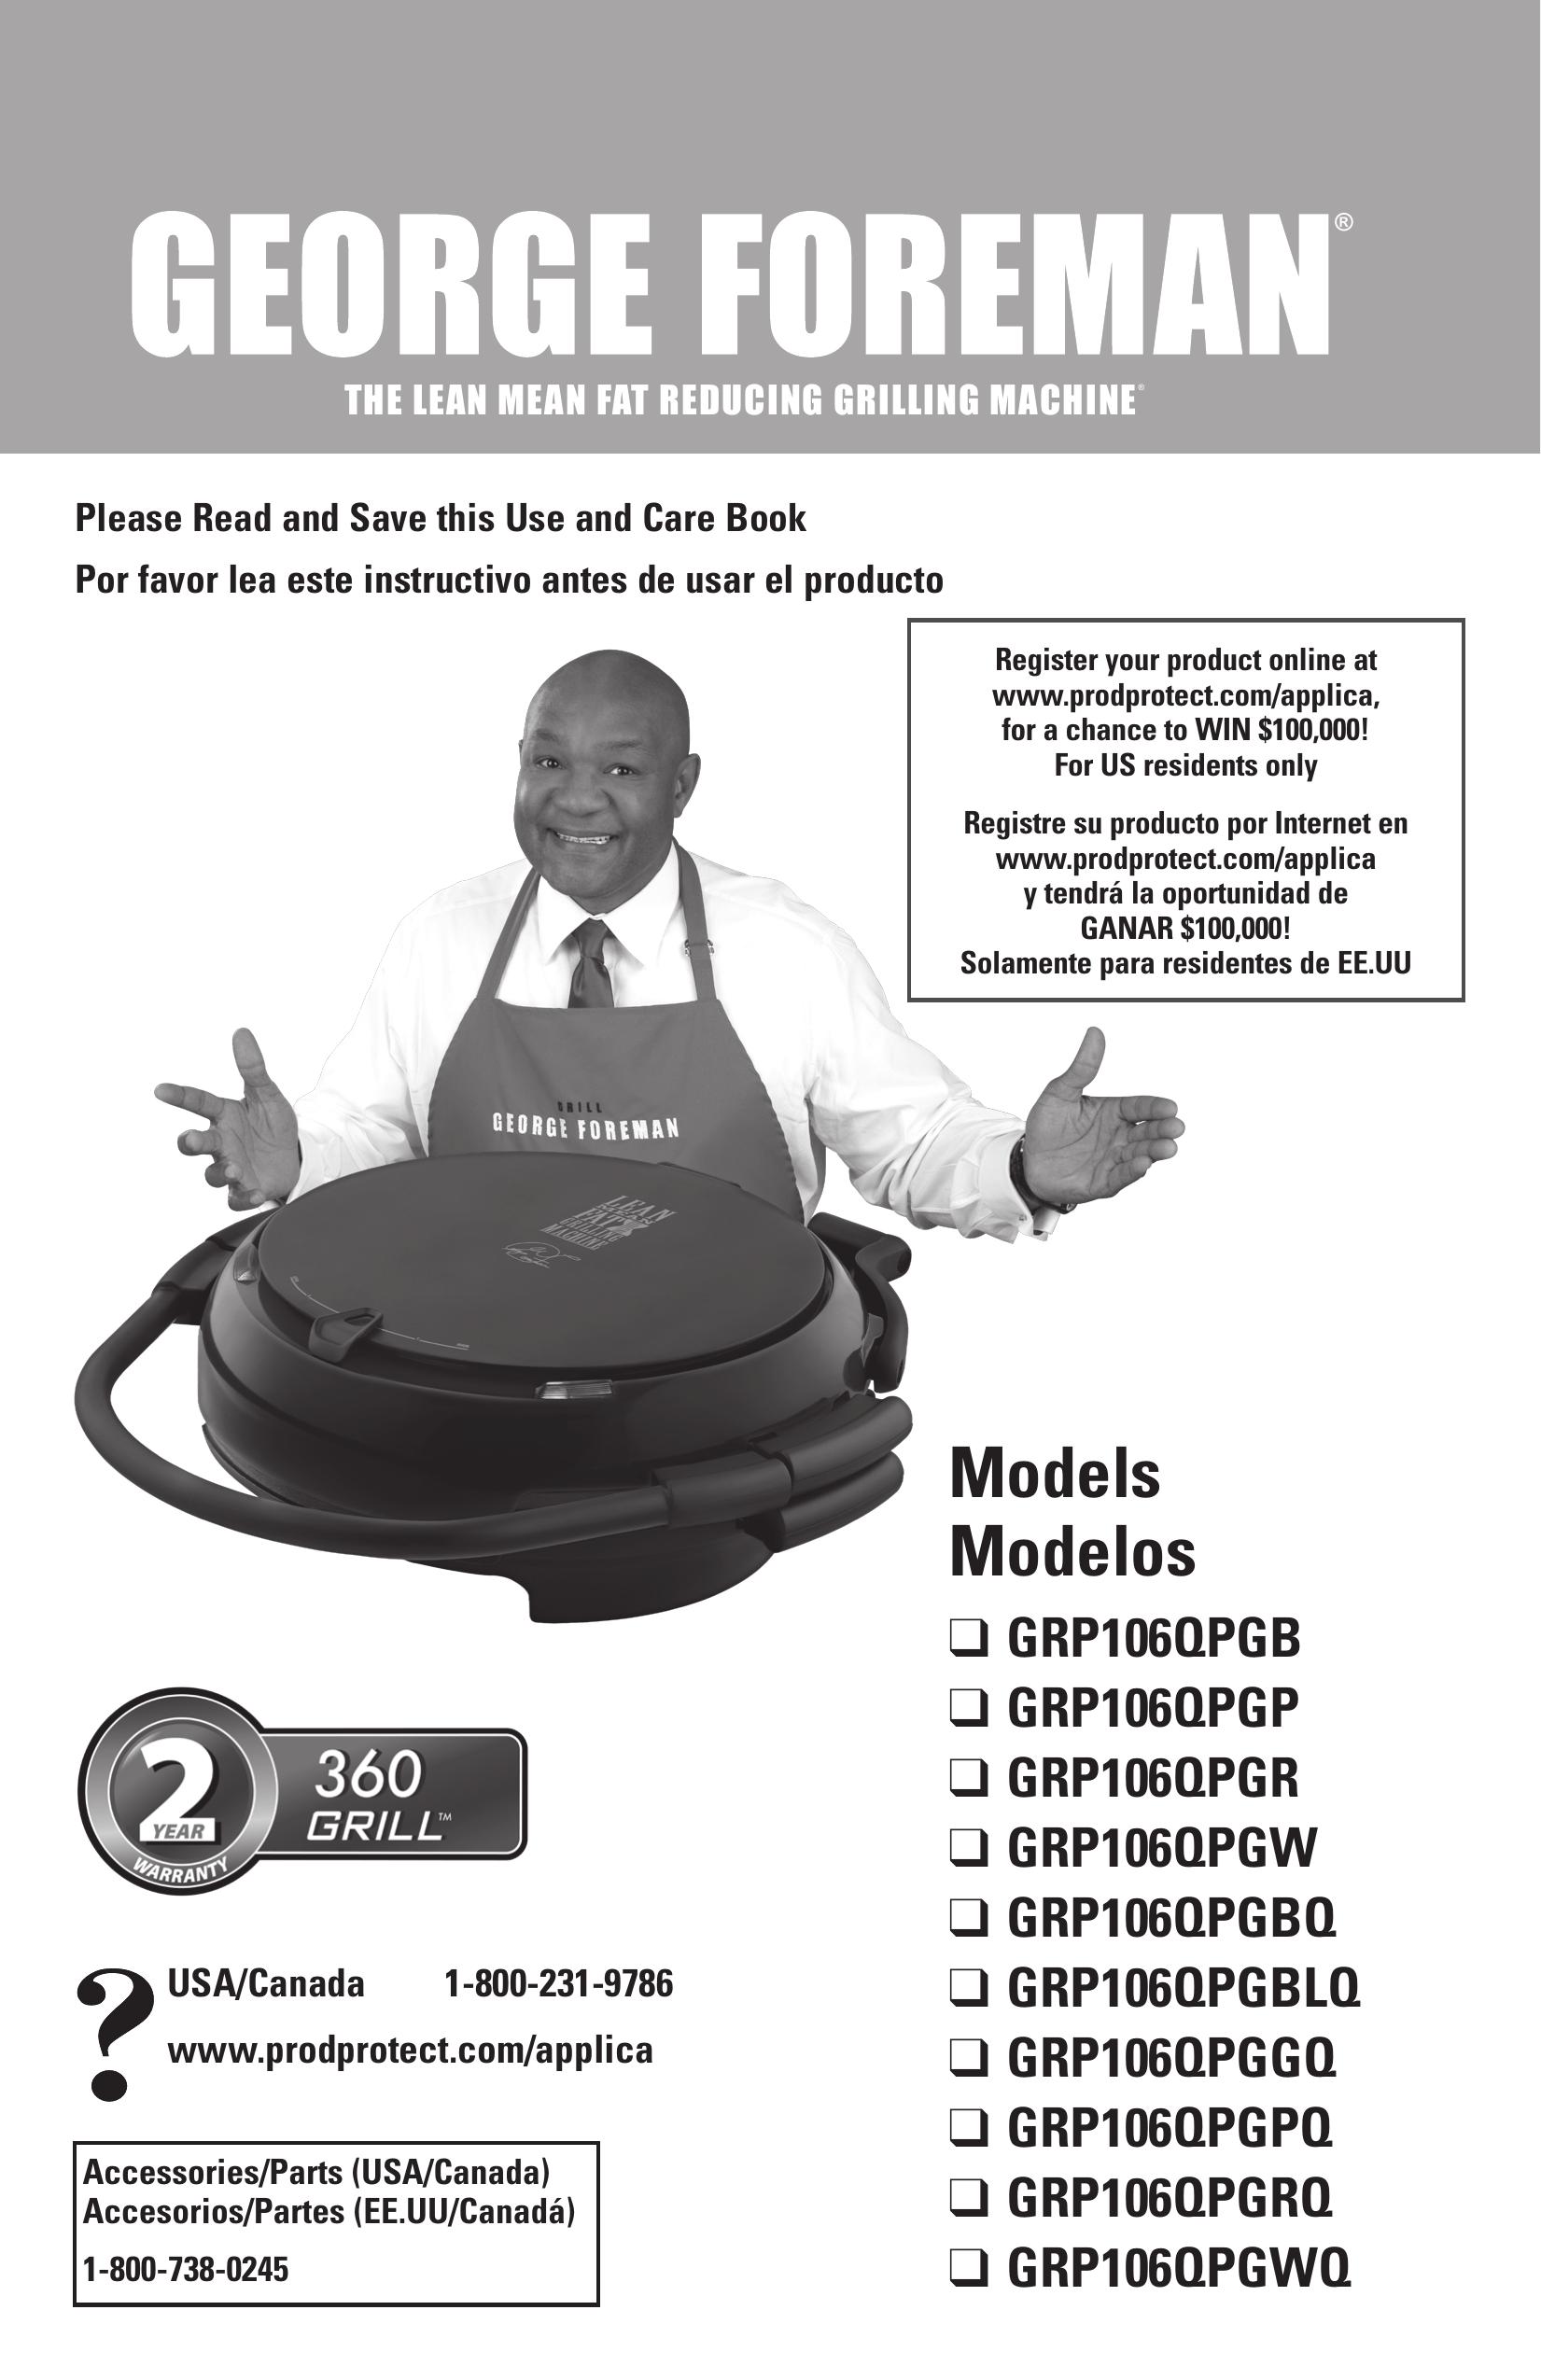 George Foreman GRP106QPGRQ Electric Grill User Manual